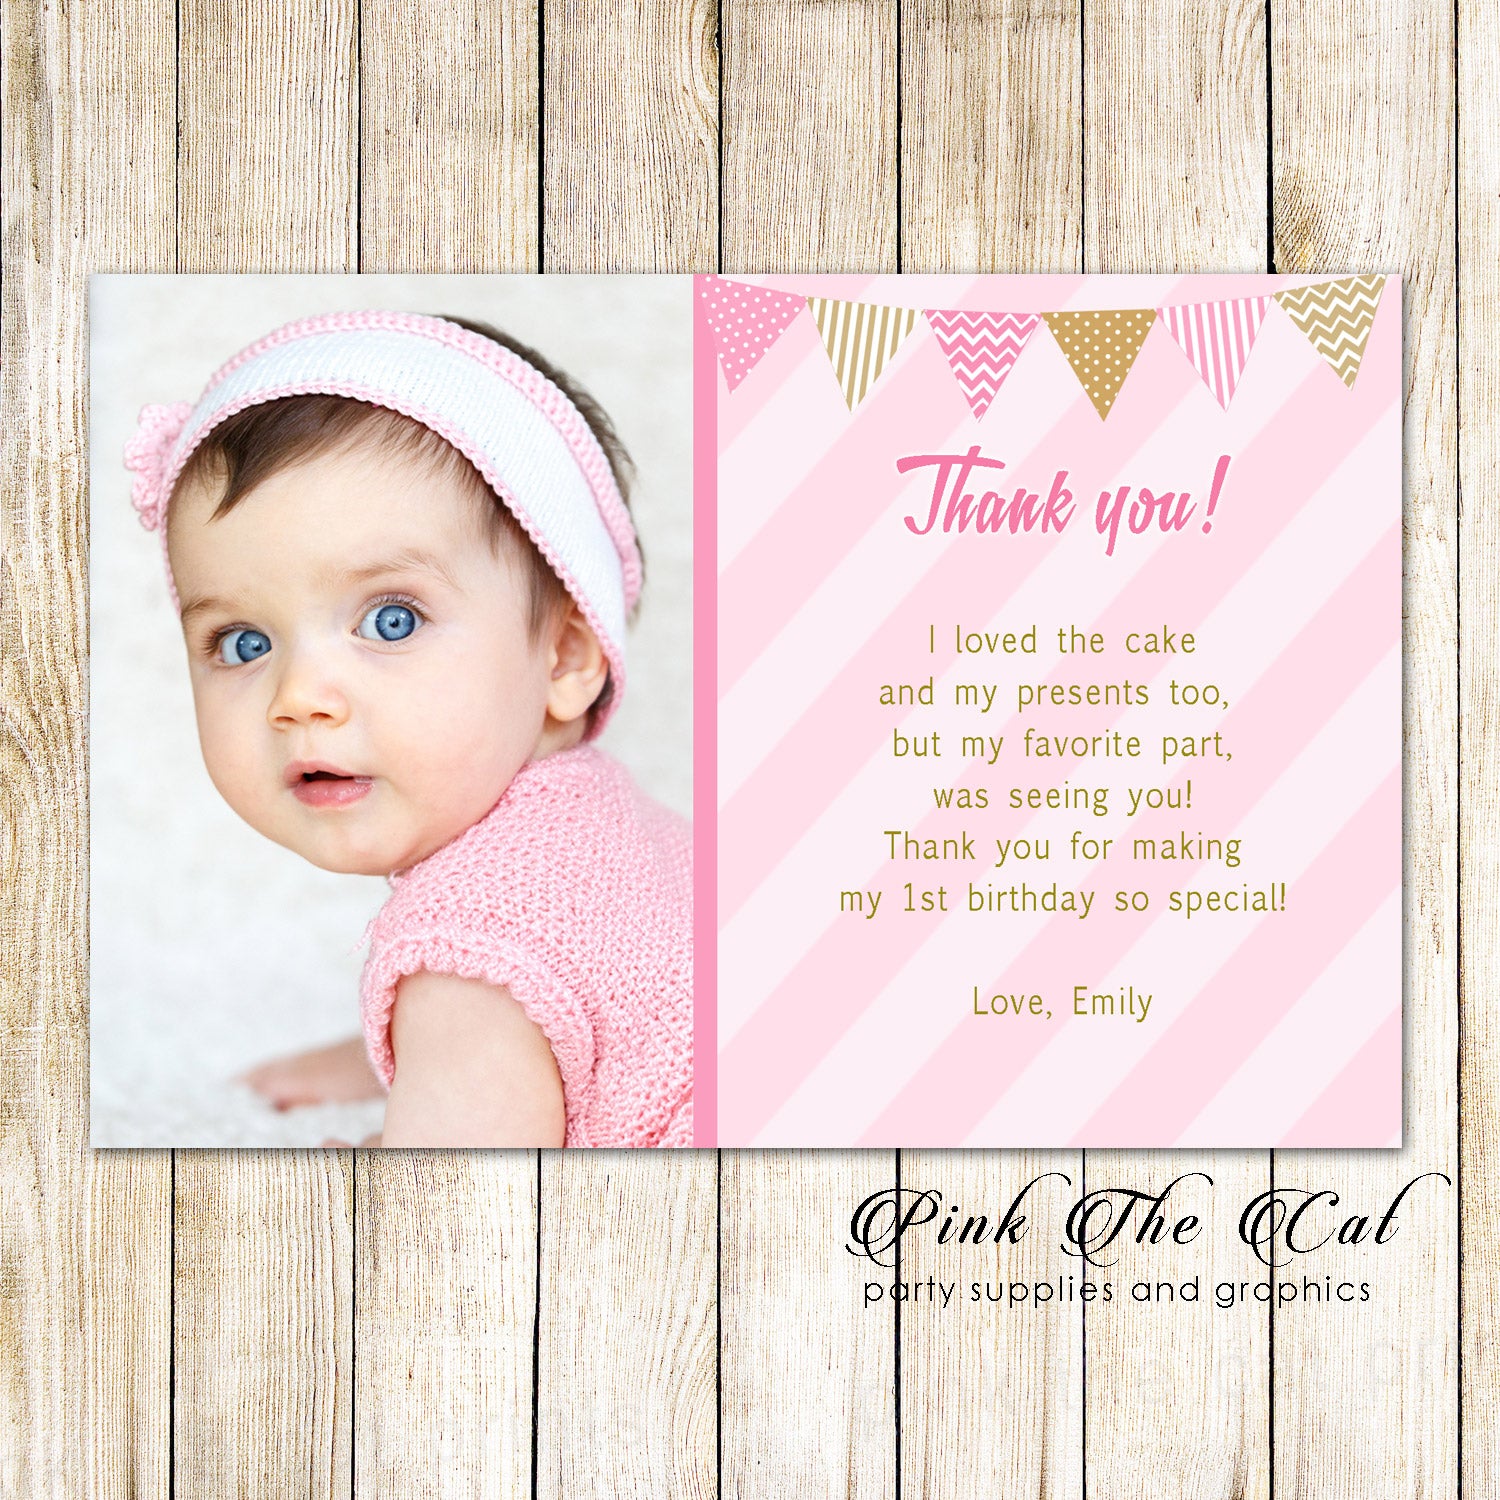 30 Thank you cards girl birthday pink gold with photo